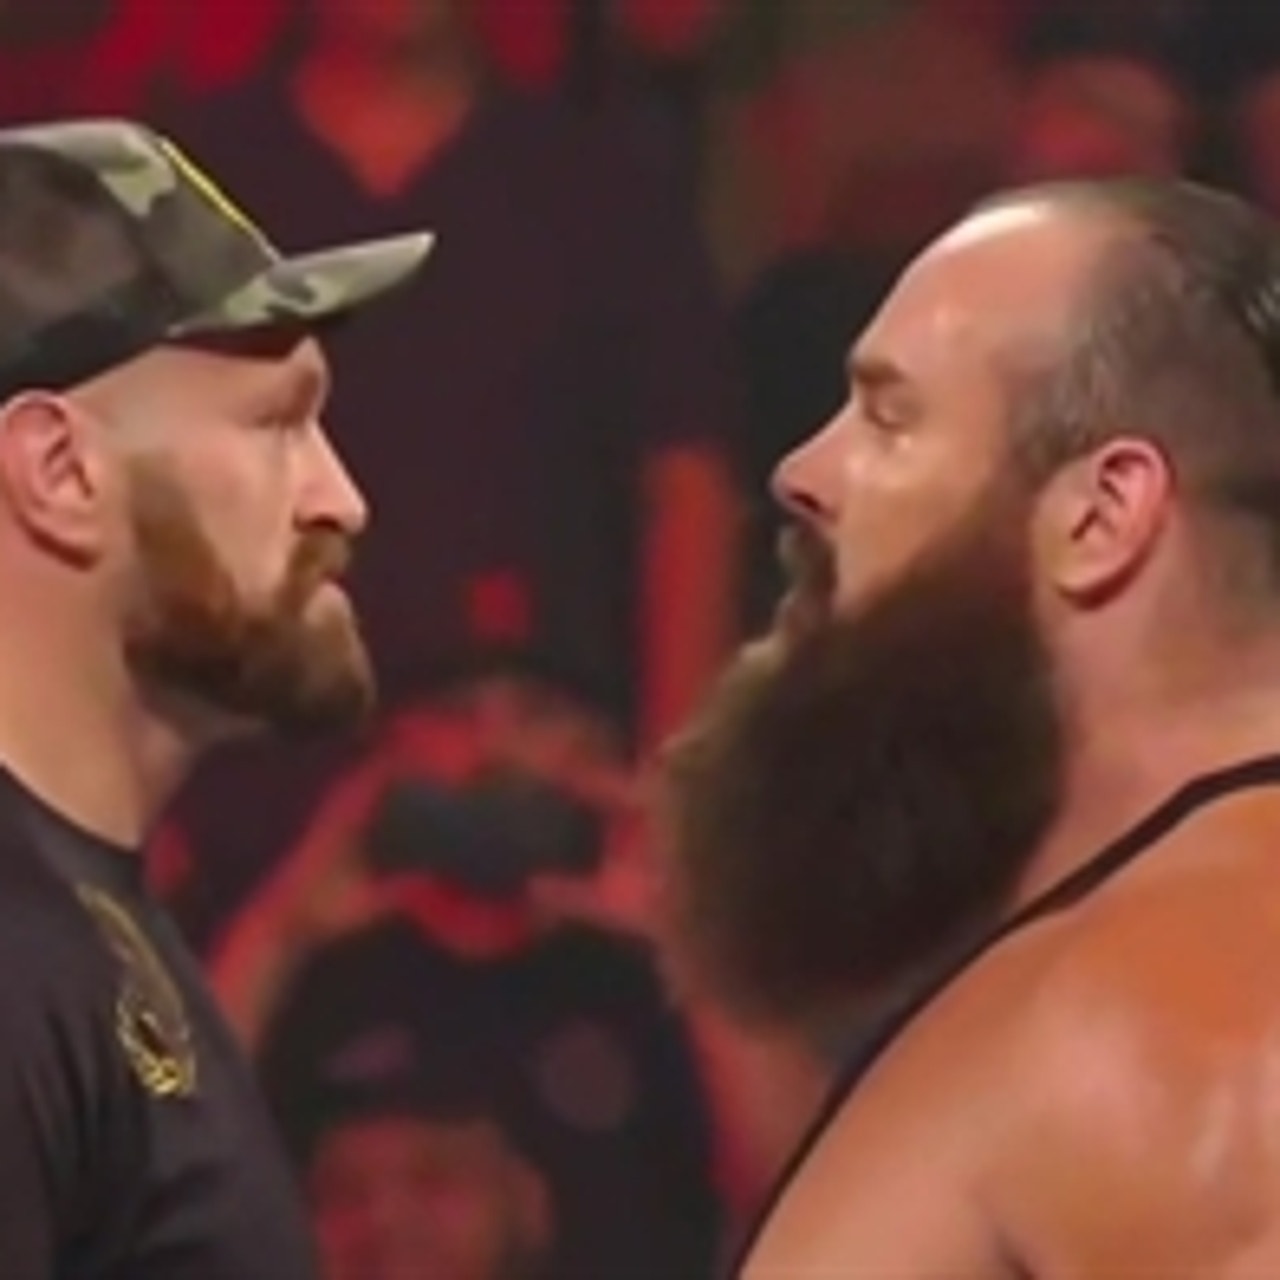 Tyson Fury and Braun Strowman go at it in the ring on Monday Night